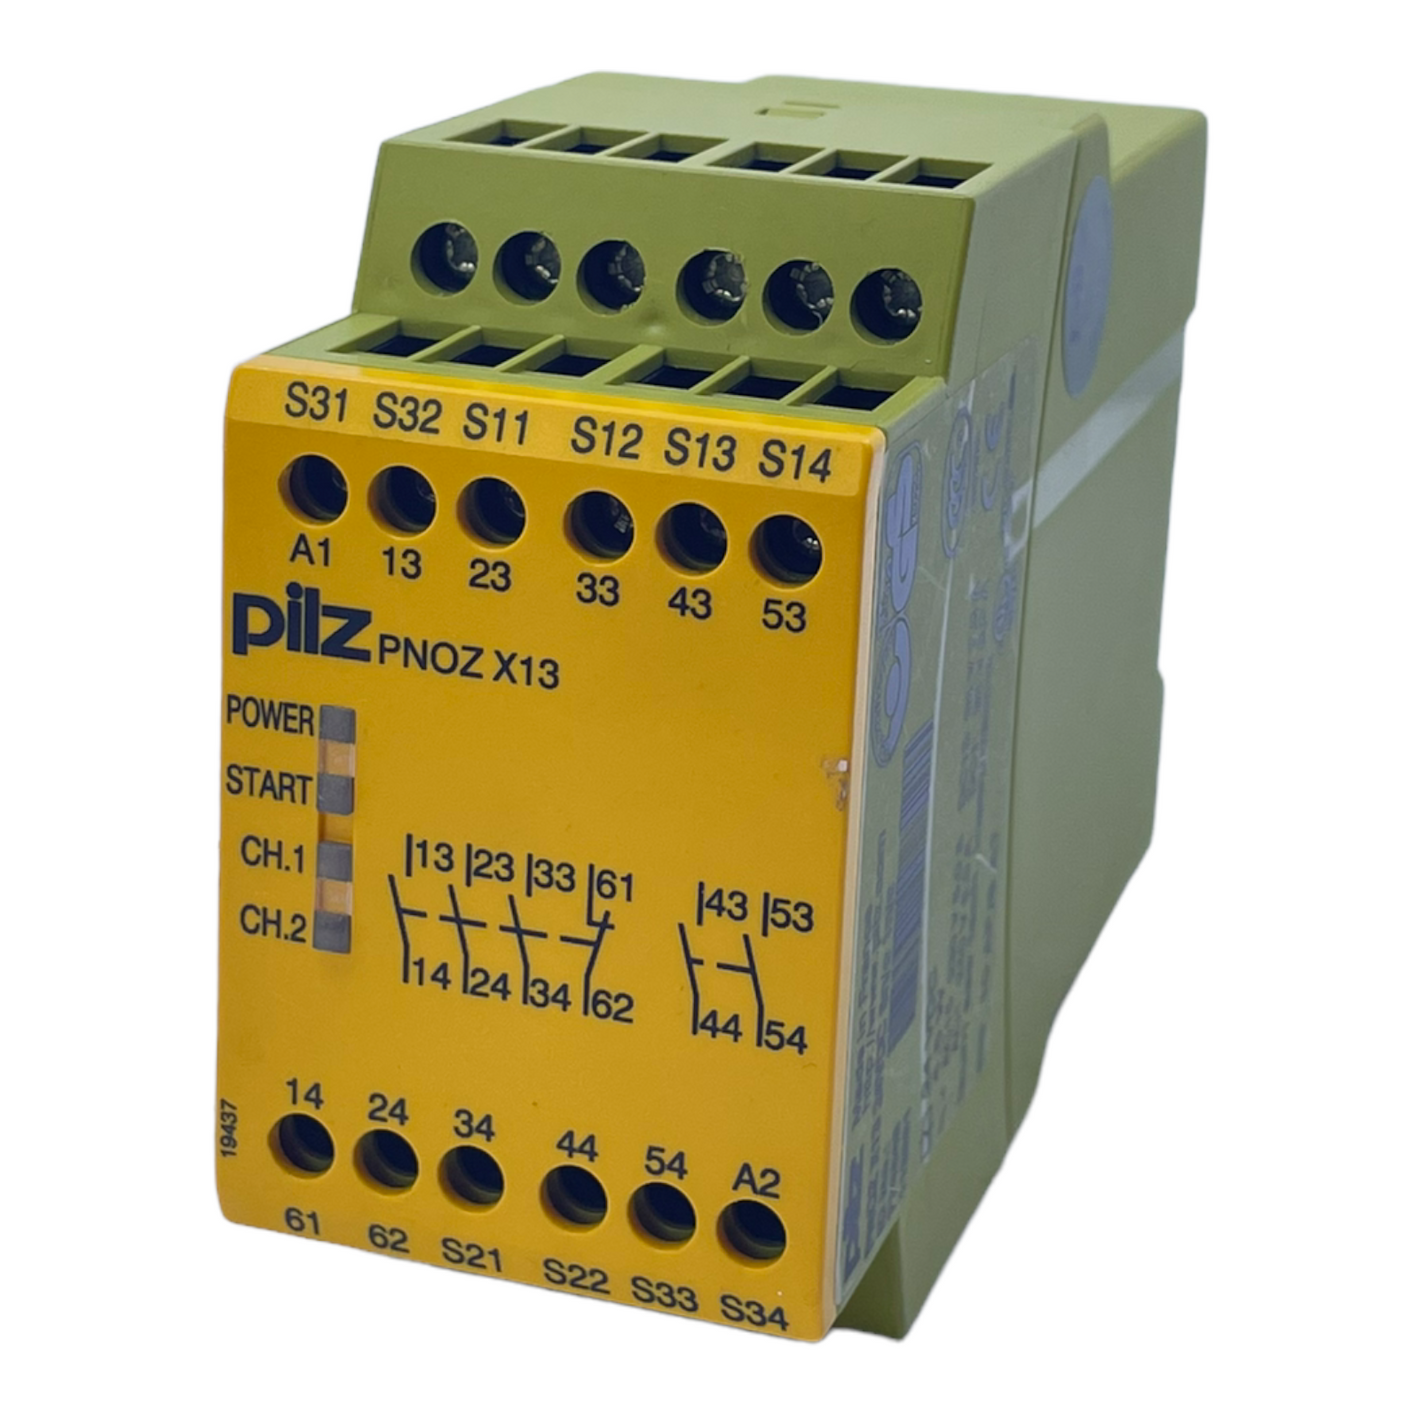 Pilz PNOZ X13 safety relay 24VDC 5n/o 1n/c 774549 for industrial use